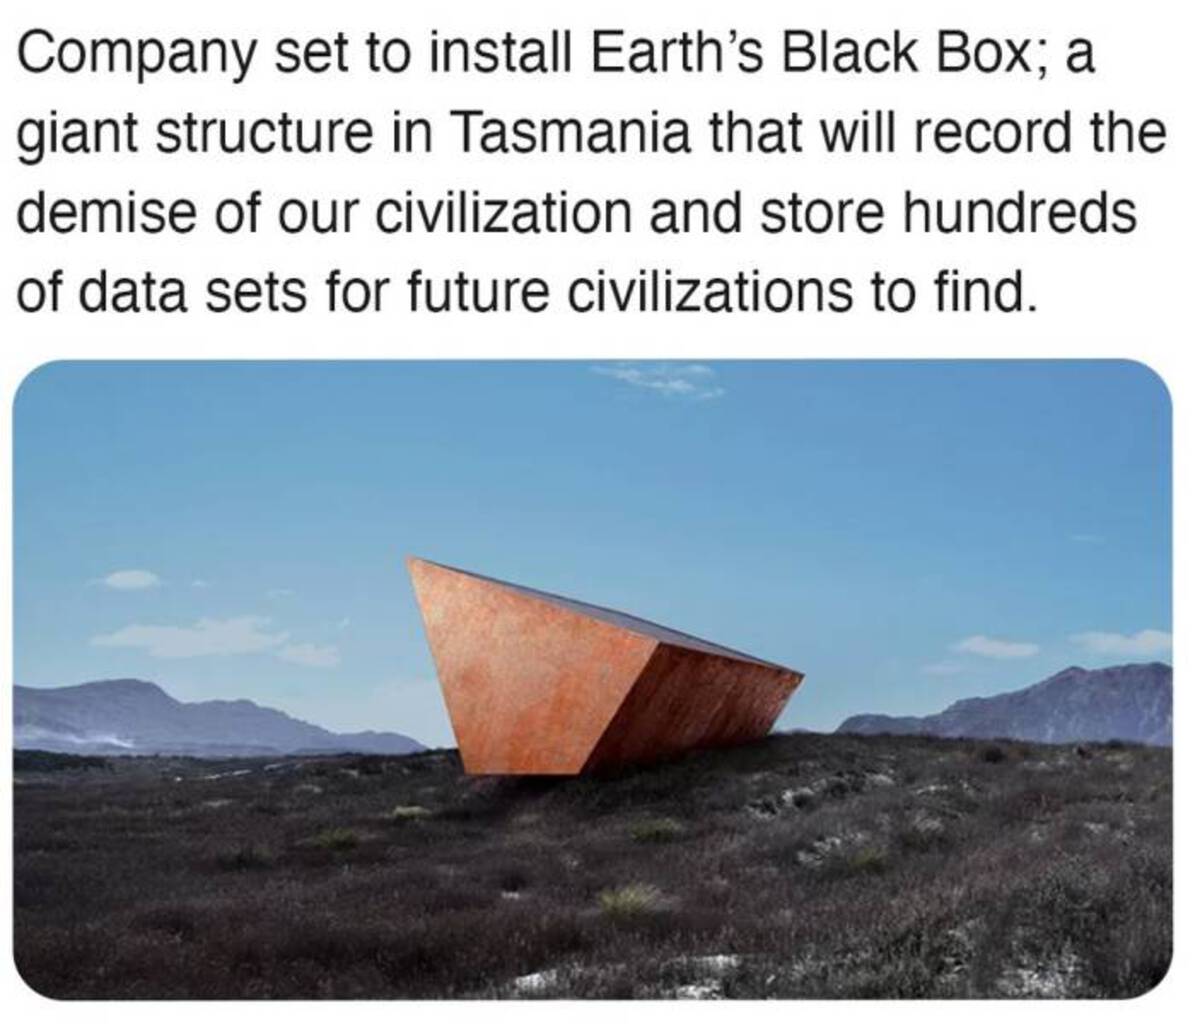 Company set to install Earth's Black Box; a giant structure in Tasmania that will record the demise of our civilization and store hundreds of data sets for future civilizations to find.